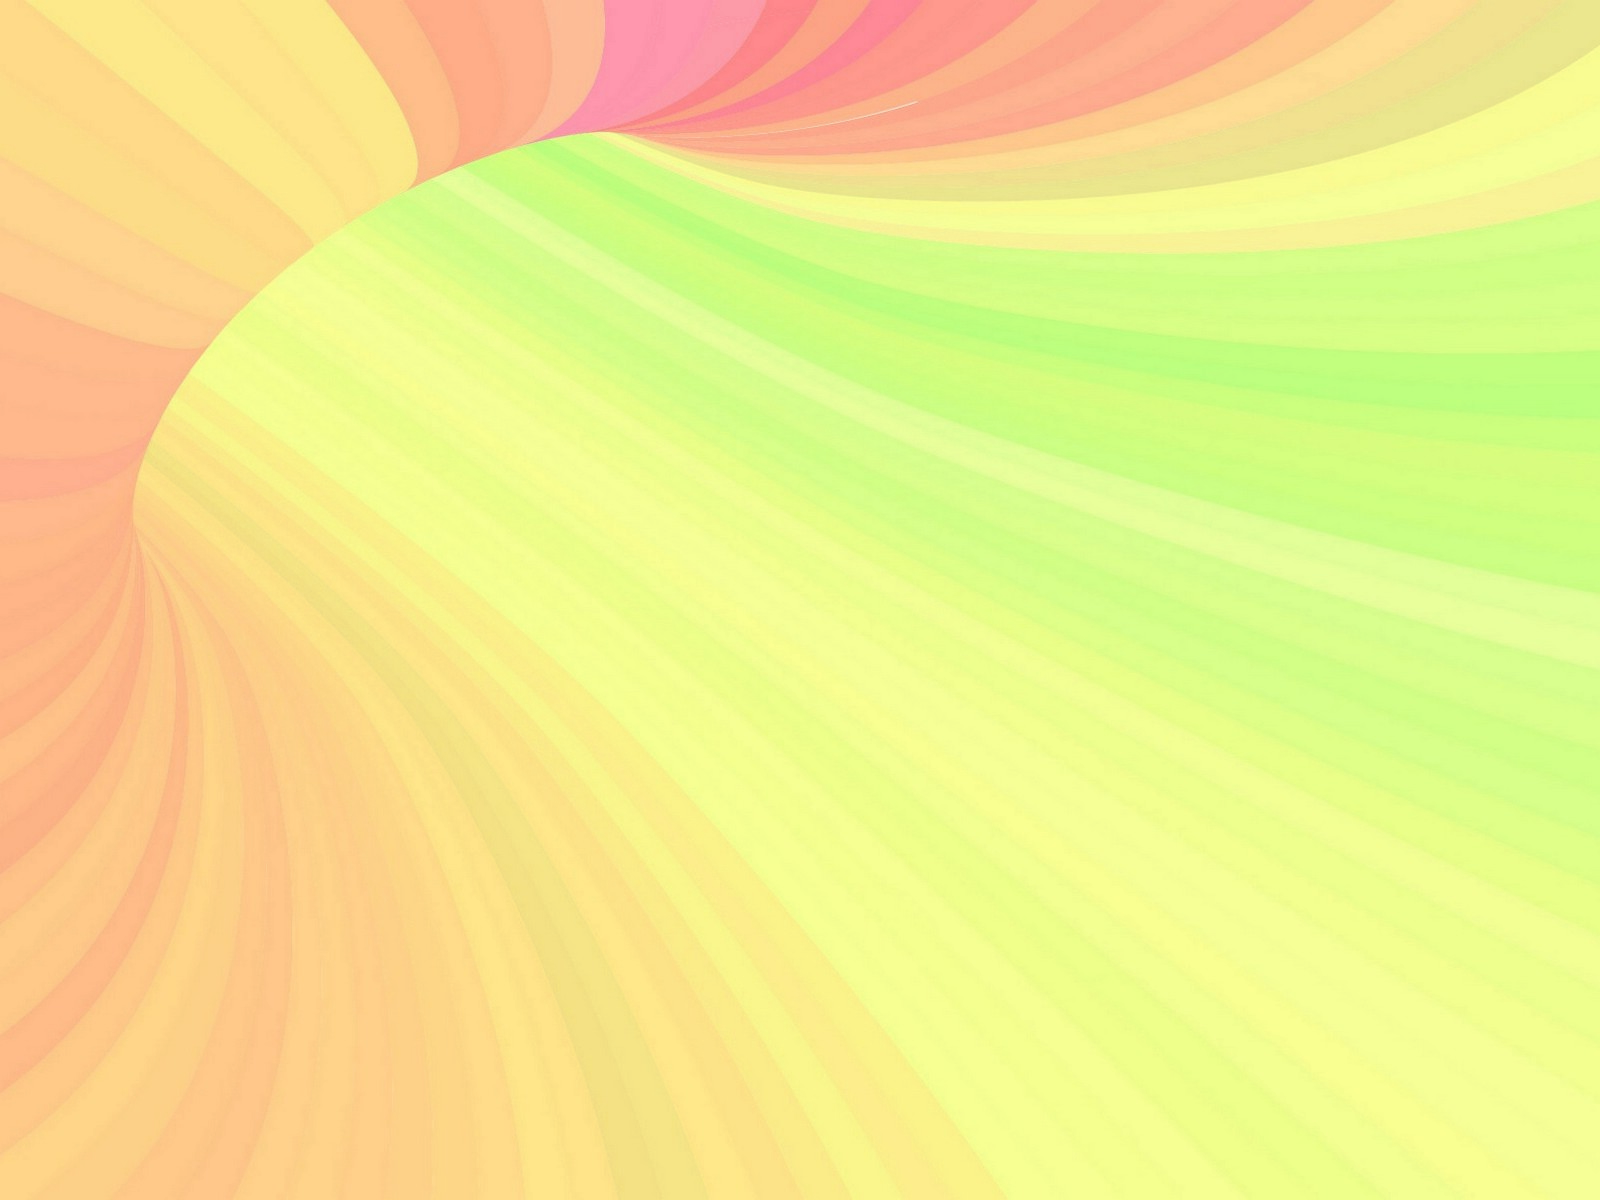 363-background-ppt-rainbow-for-free-myweb